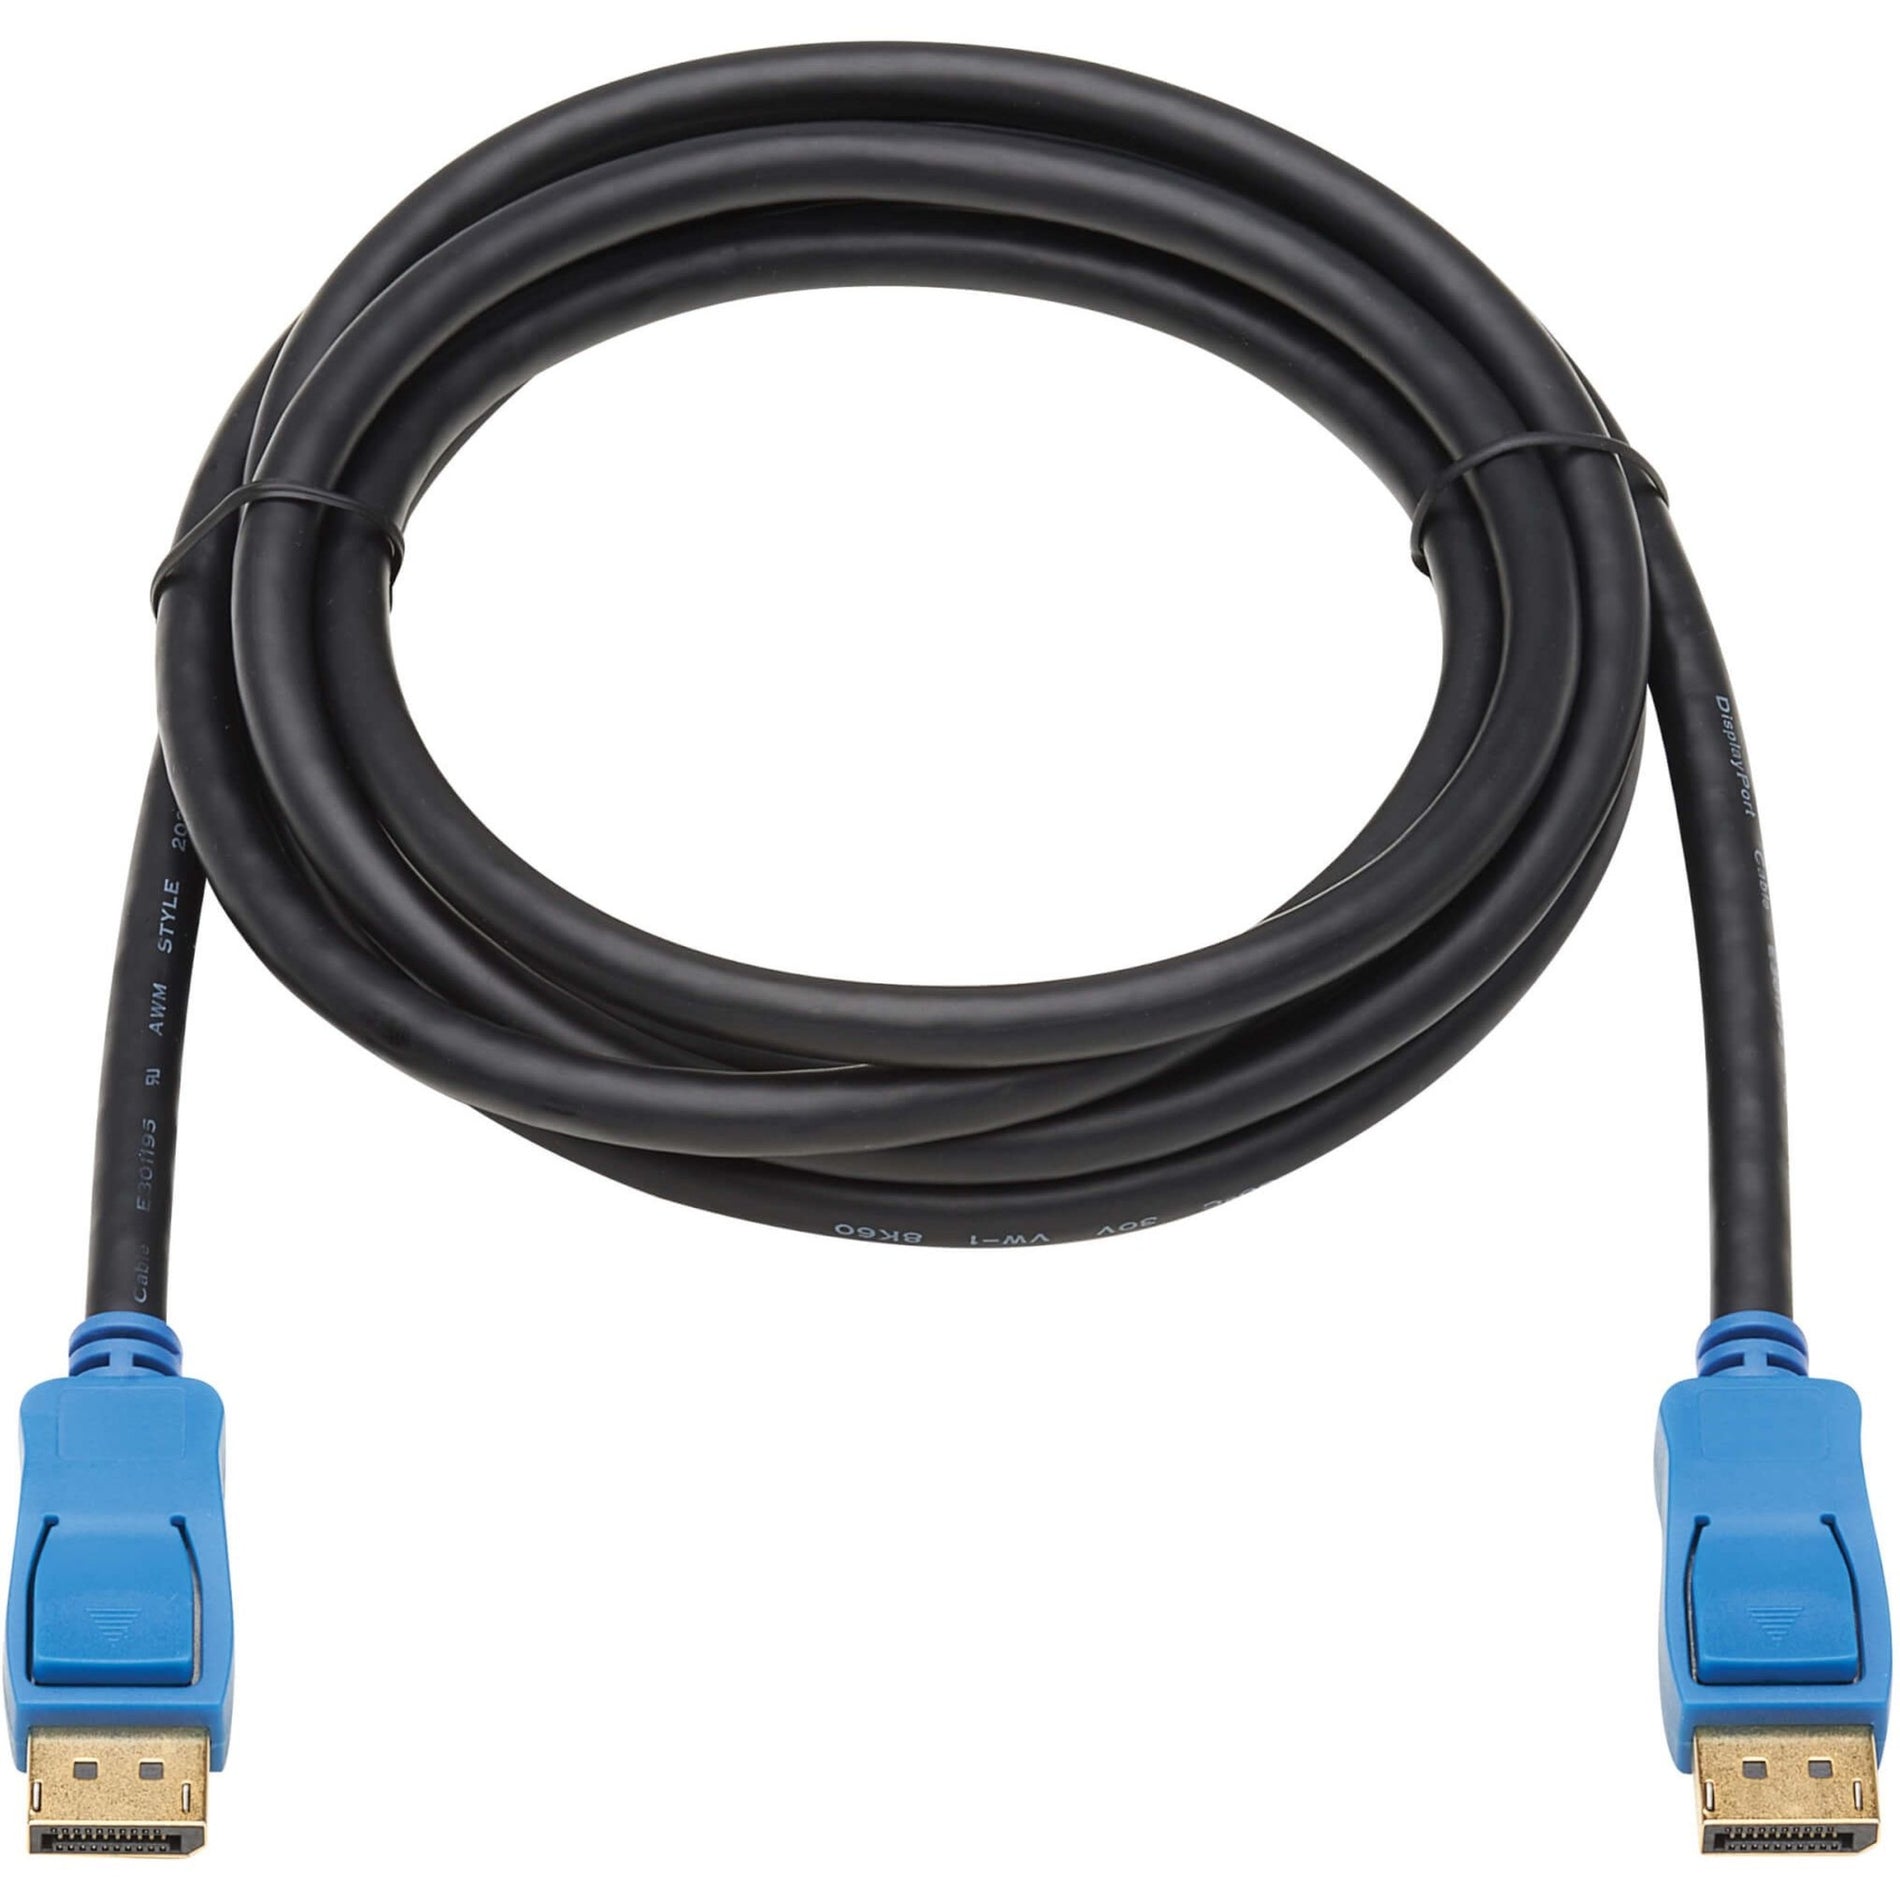 Tripp Lite P580-009-8K6 DisplayPort A/V Cable, 9 ft, Gold-Plated Connectors, 4K UHD Support